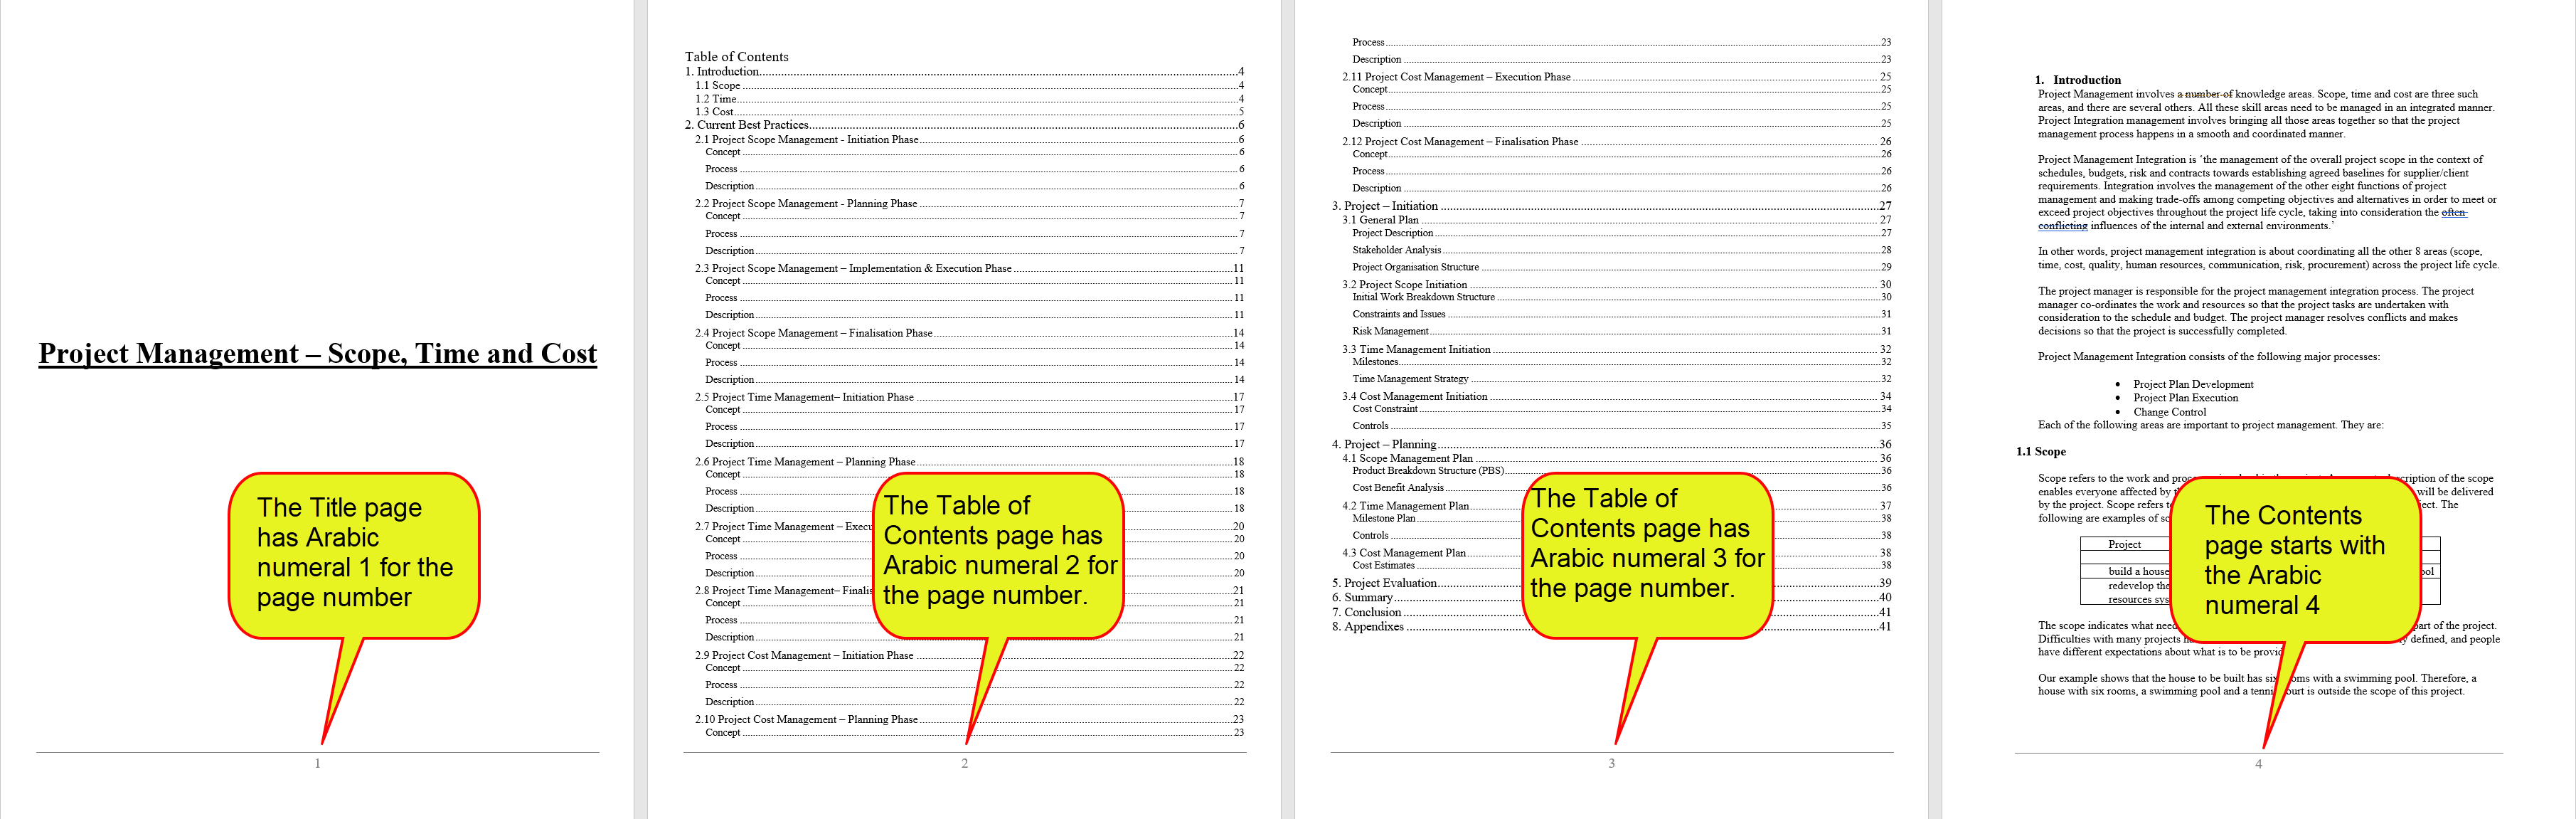 Example of a piece of academic writing with the Title Page having a page number of 1, with the Table of Contents having page numbers 2 to 3, and the main text with page number 4.